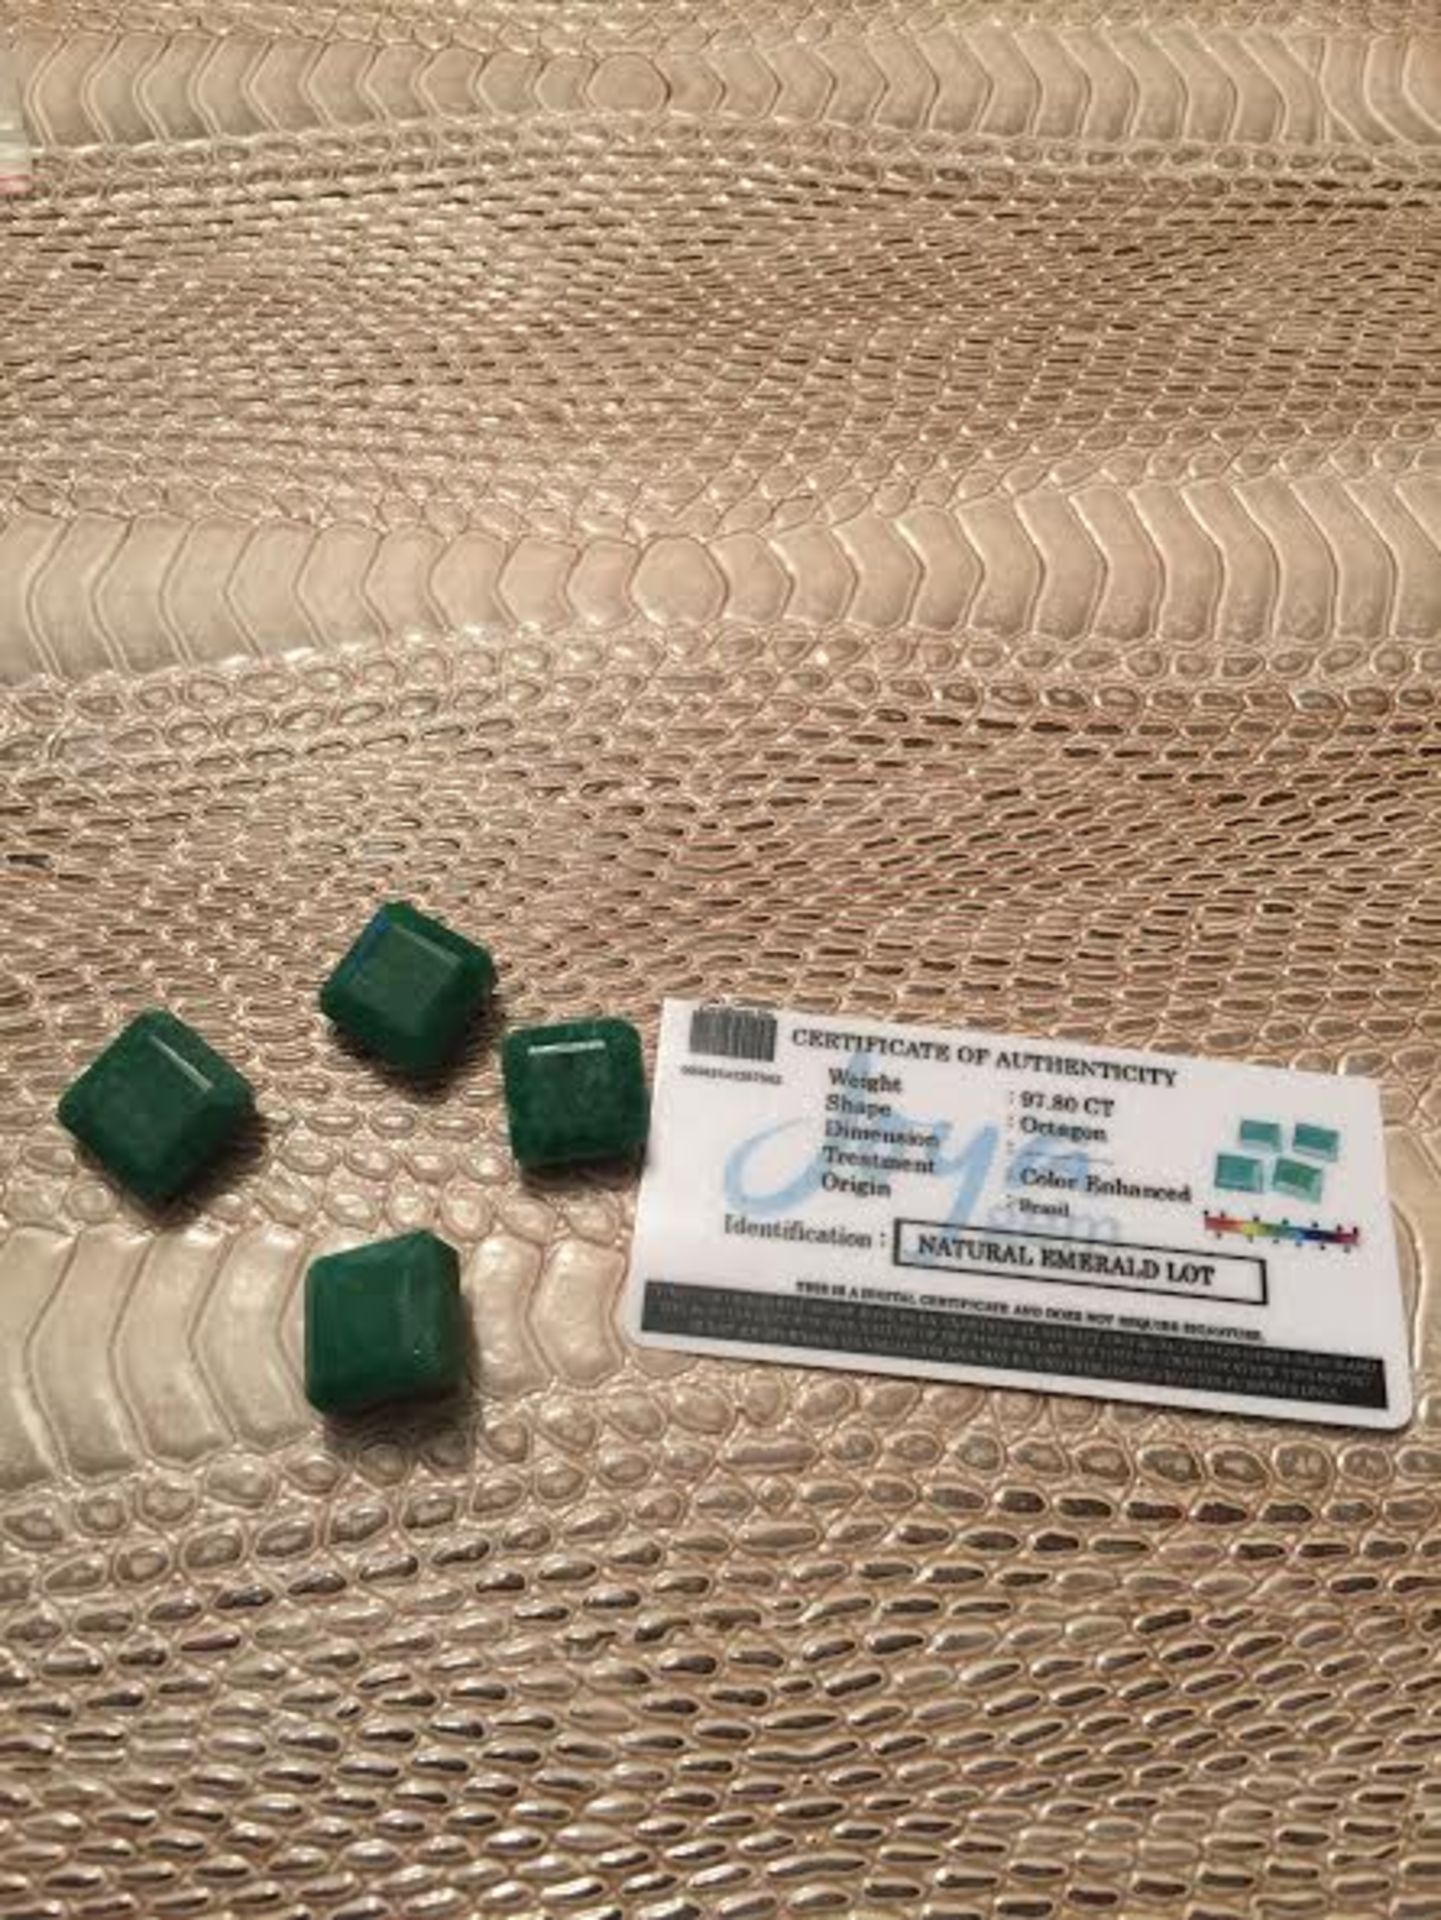 97.80 ct/4 PCs emerald with certificate - Image 2 of 2